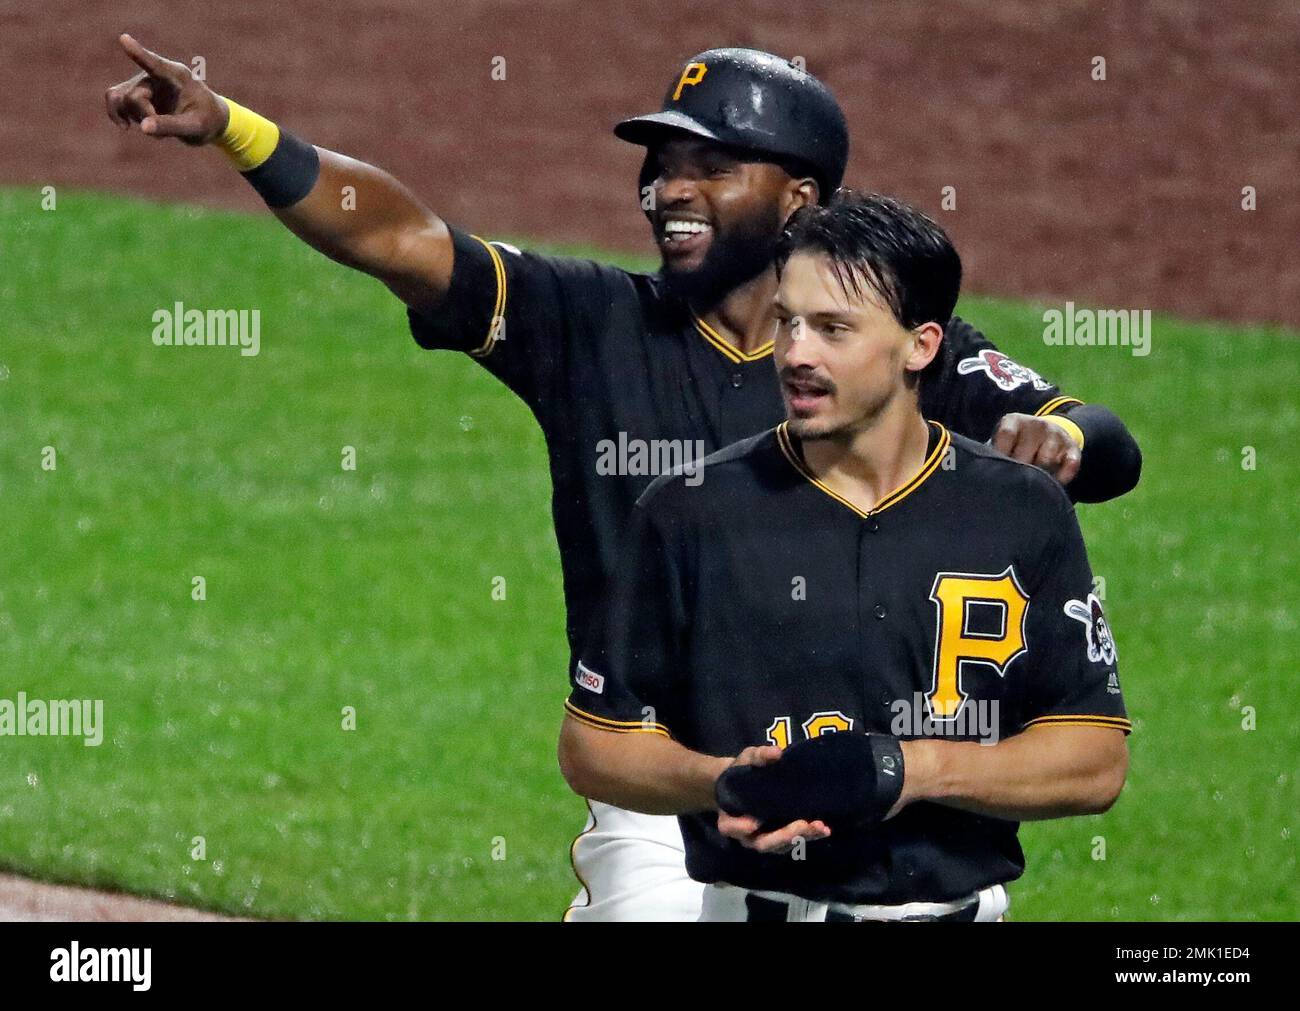 Pittsburgh Pirates' Ka'ai Tom goes to bat against the Cincinnati Reds  during a baseball game, Monday, May 10, 2021, in Pittsburgh. (AP  Photo/Keith Srakocic Stock Photo - Alamy